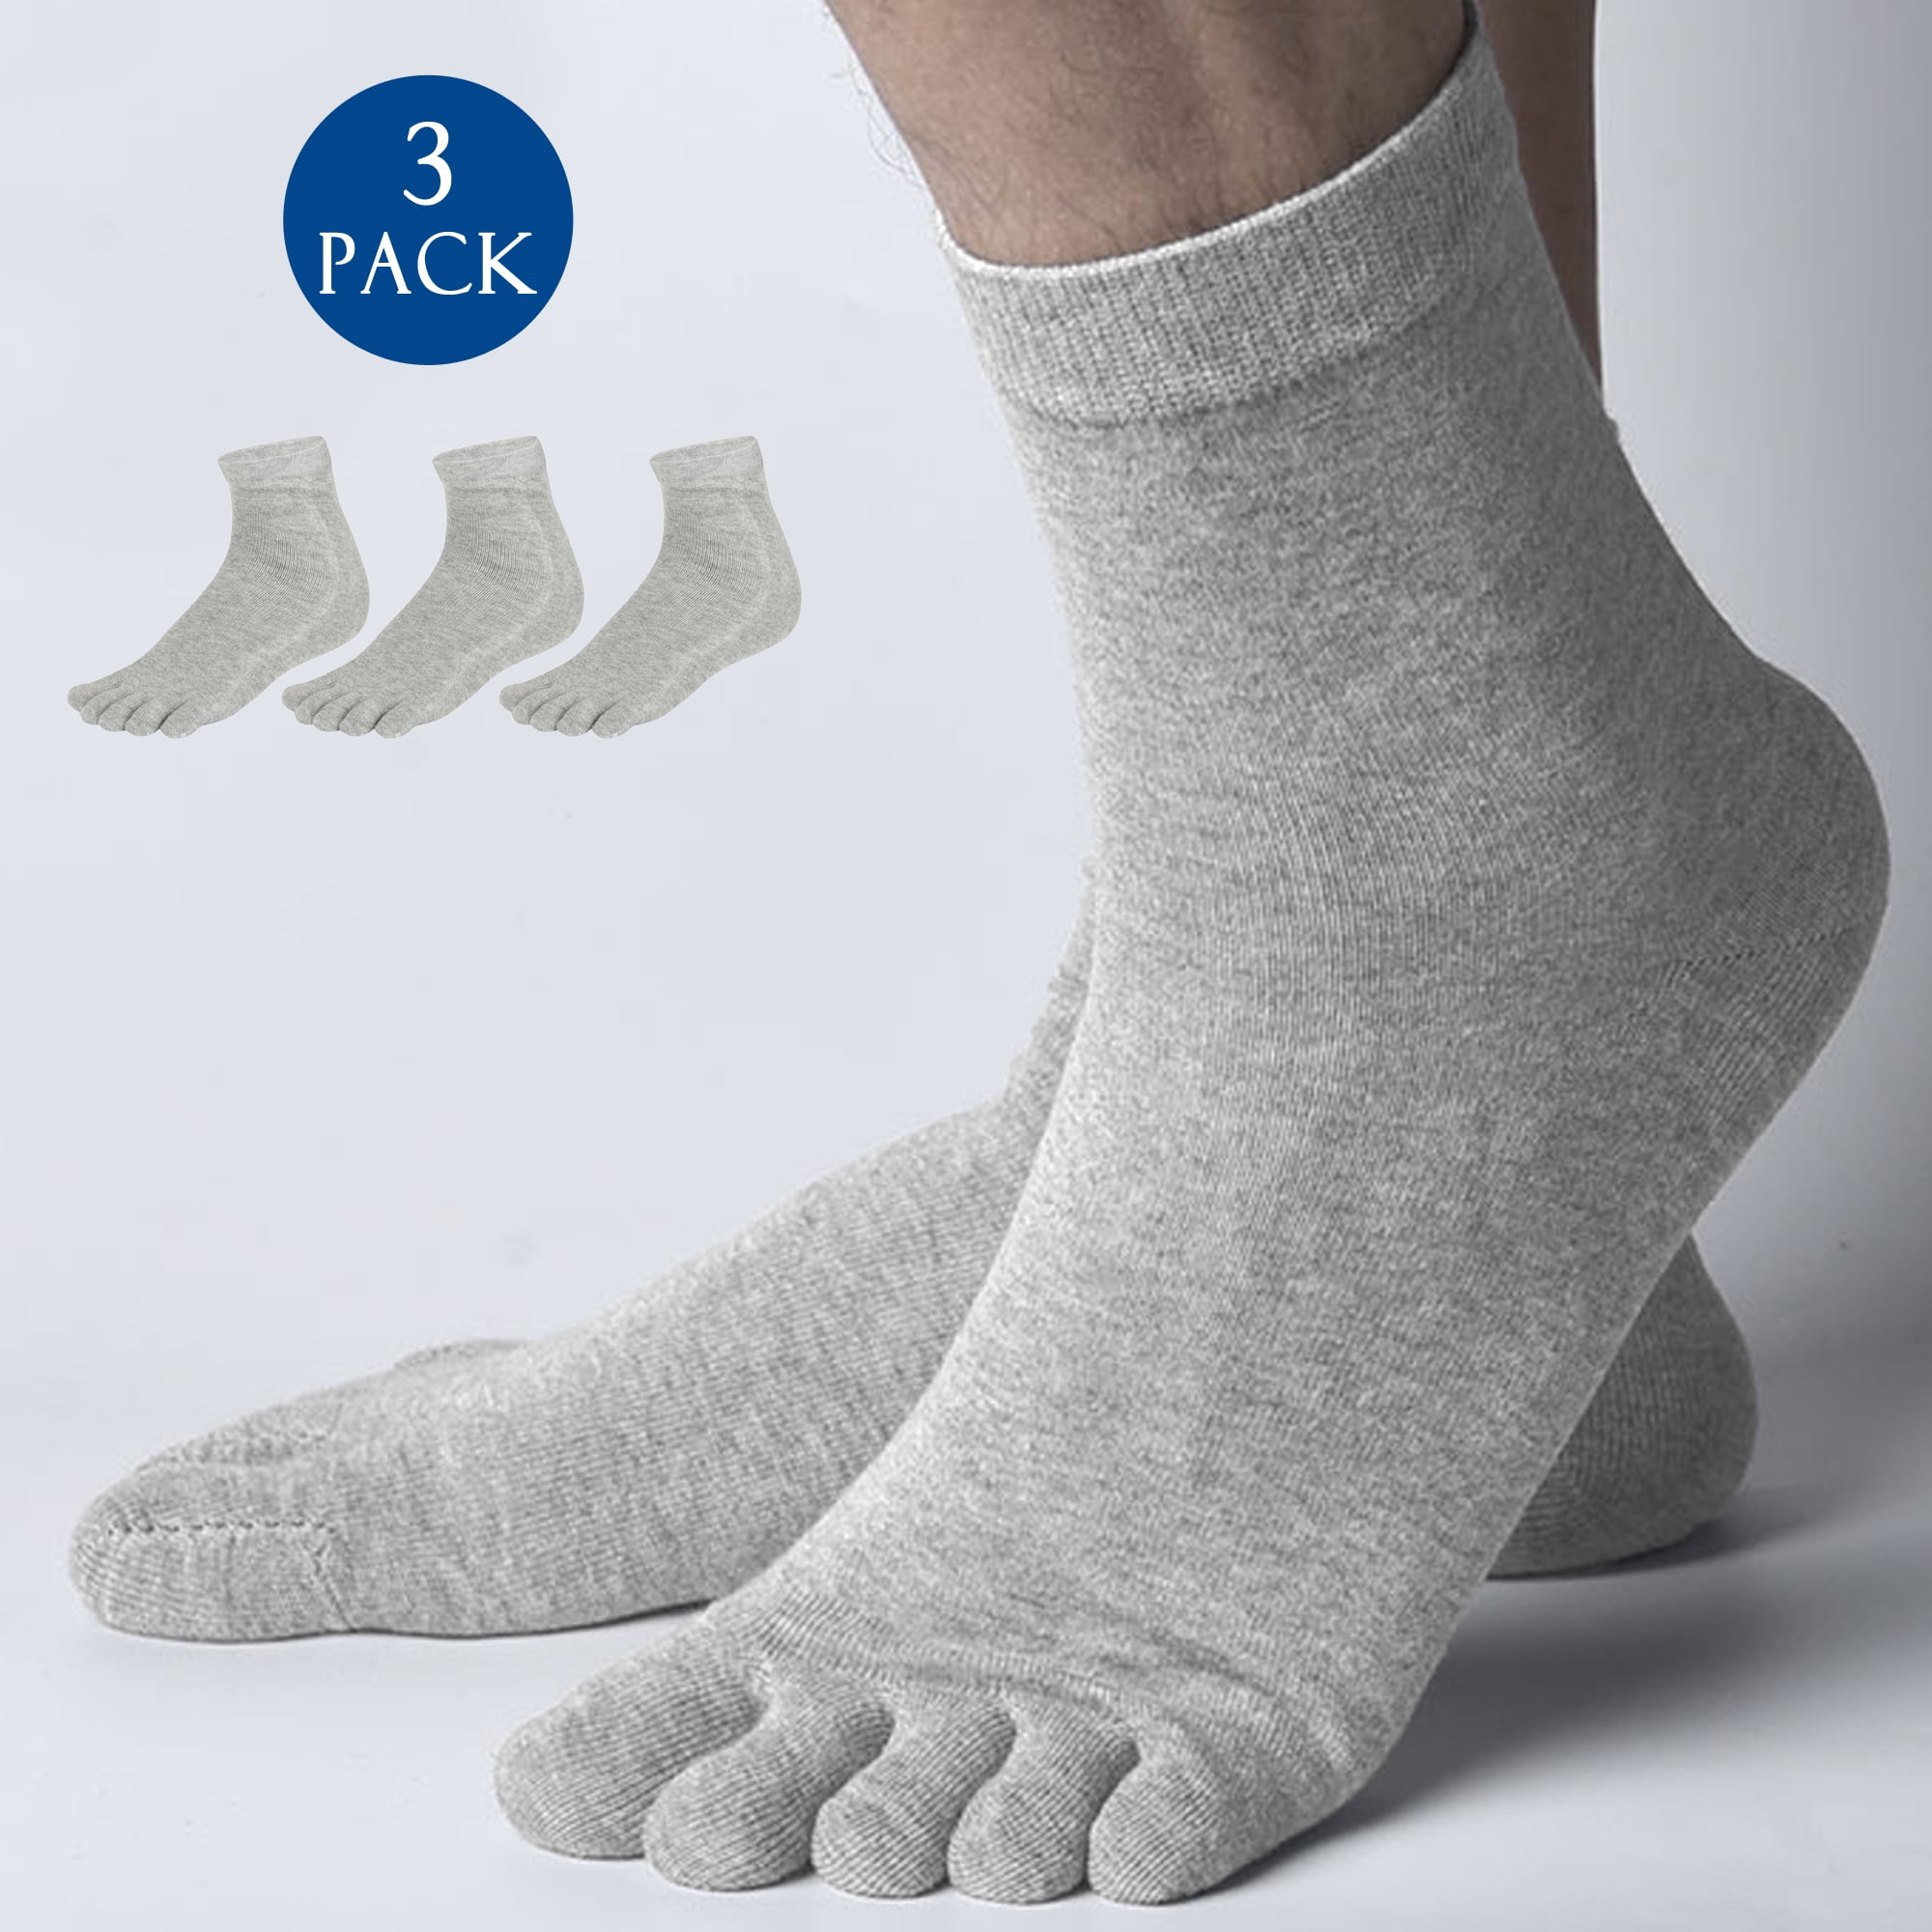 DODOING 3 Pairs Men Five Fingers Separate Toe Socks Comfortable Warm Hot,  One Size 